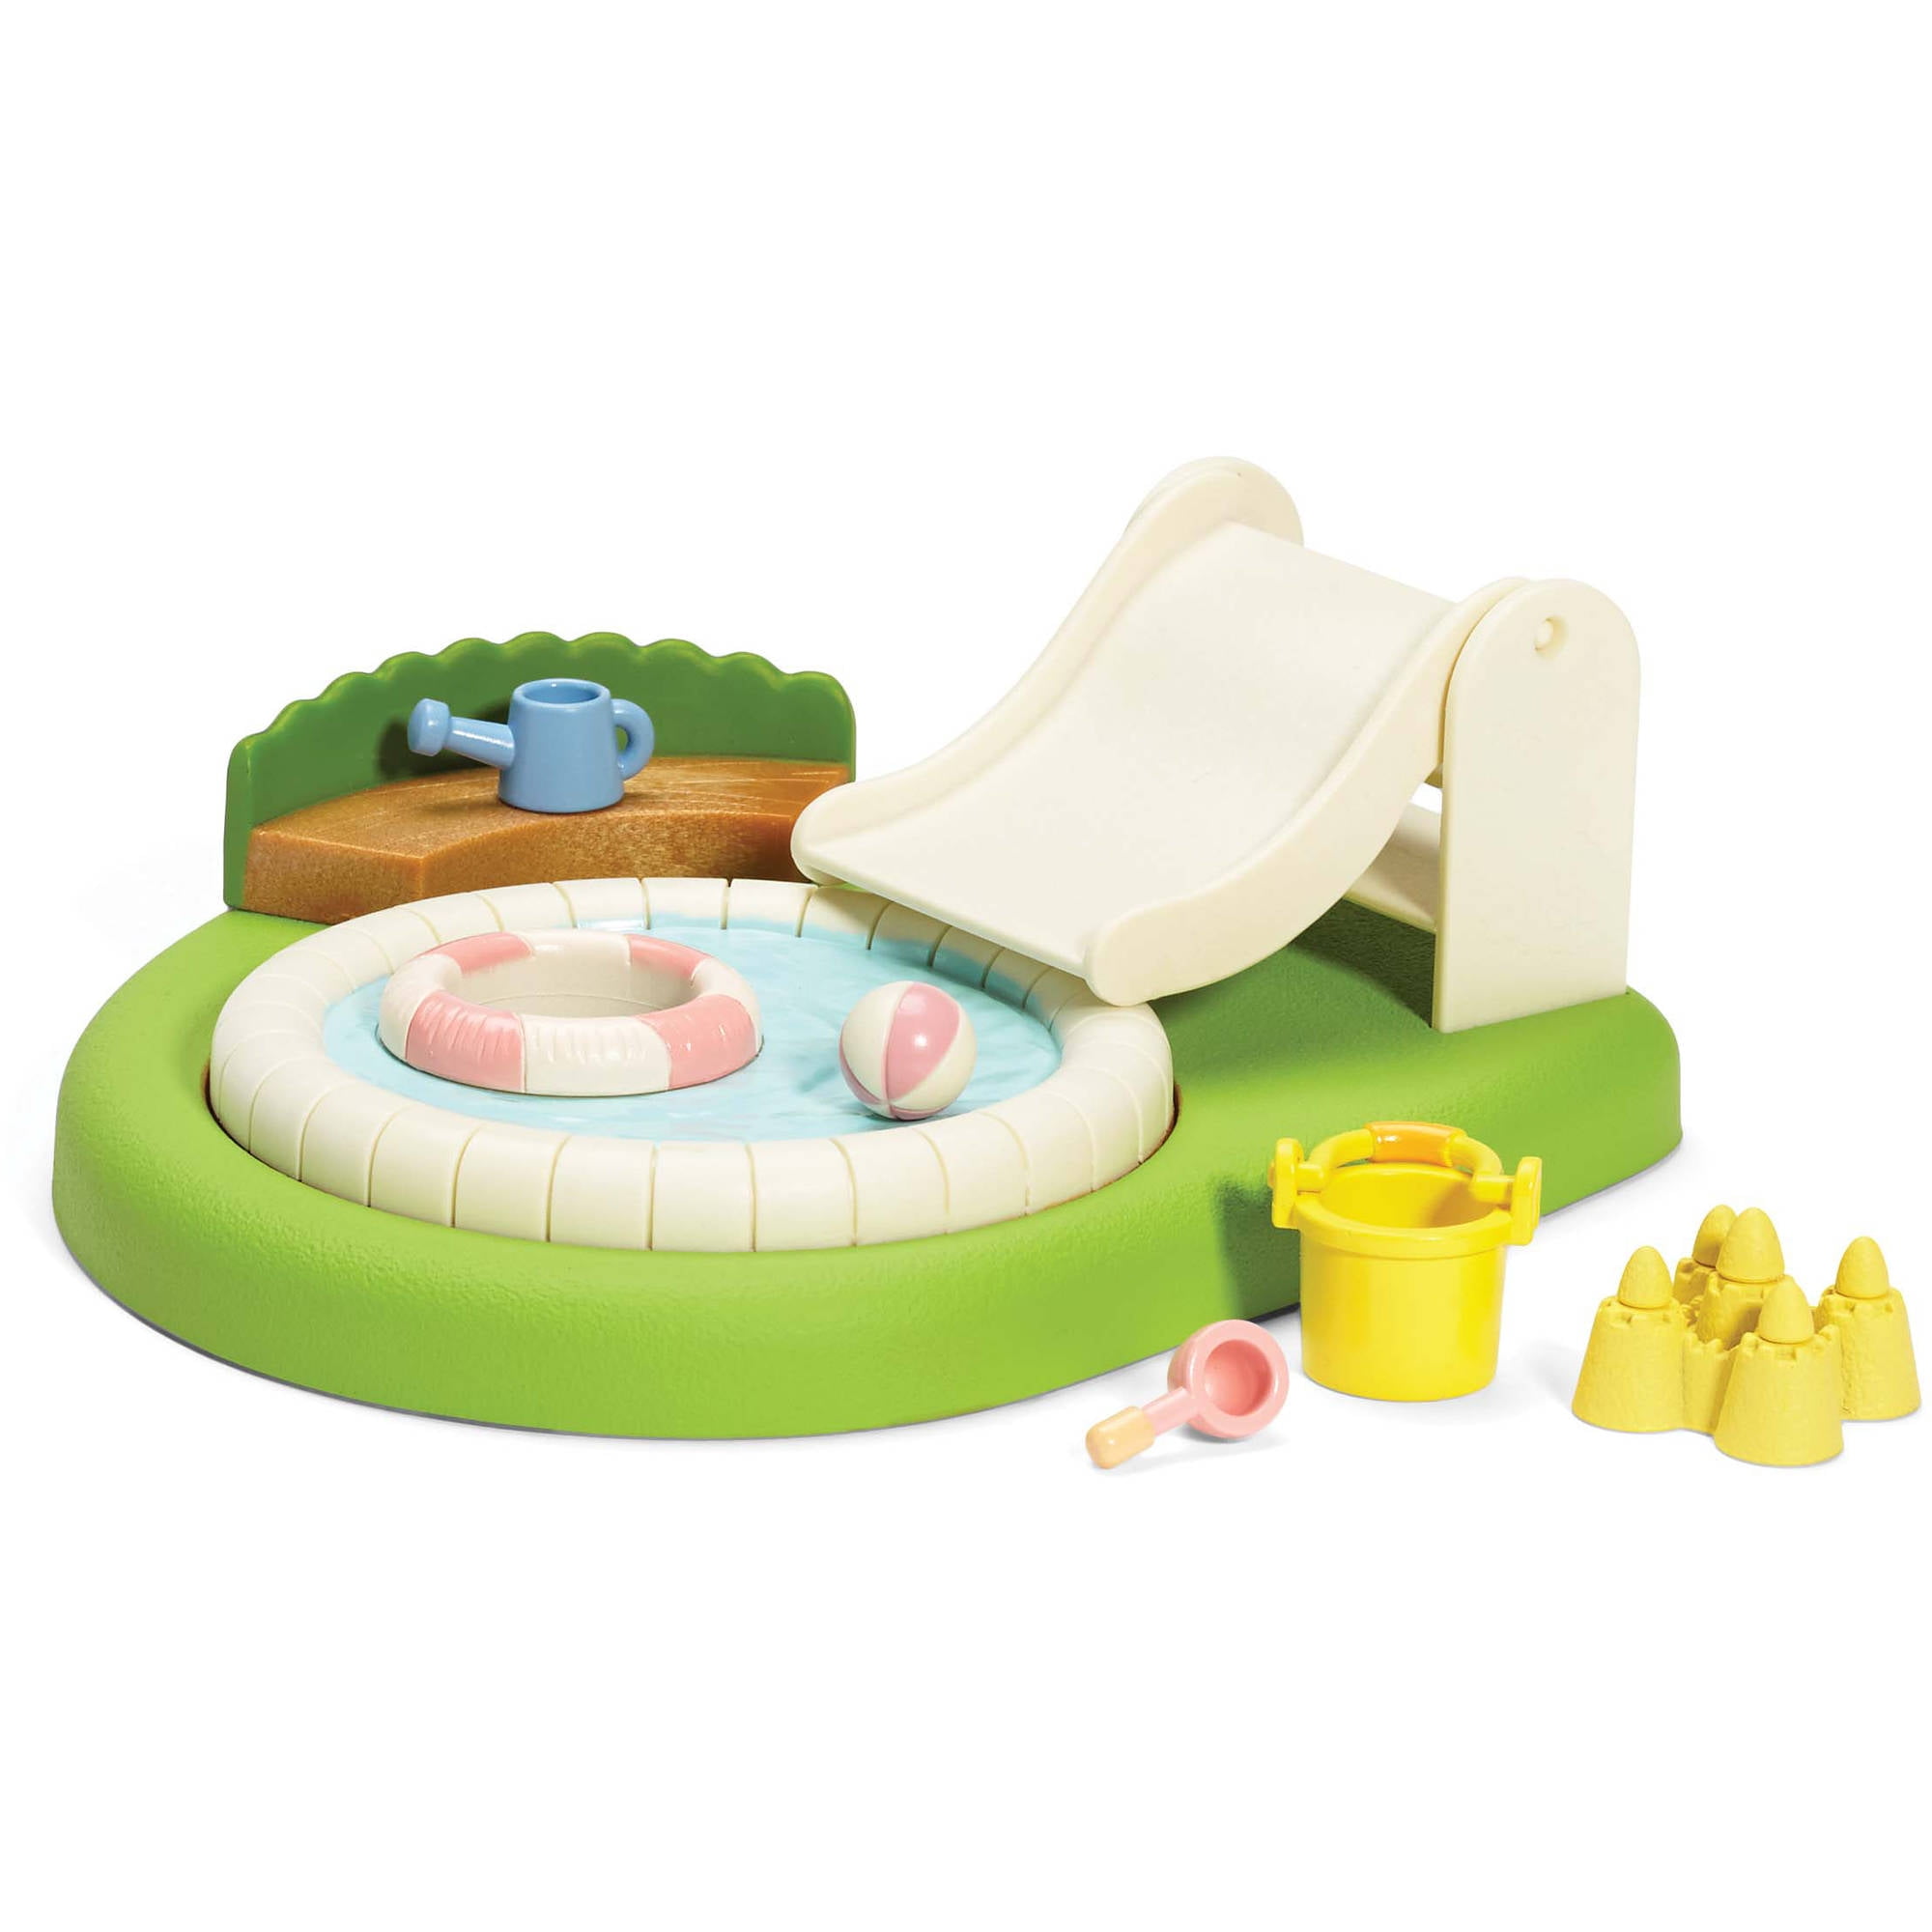 Family Baby Pool Sandbox Furniture Set Calico Critters Kids Accessories Toy Gift 